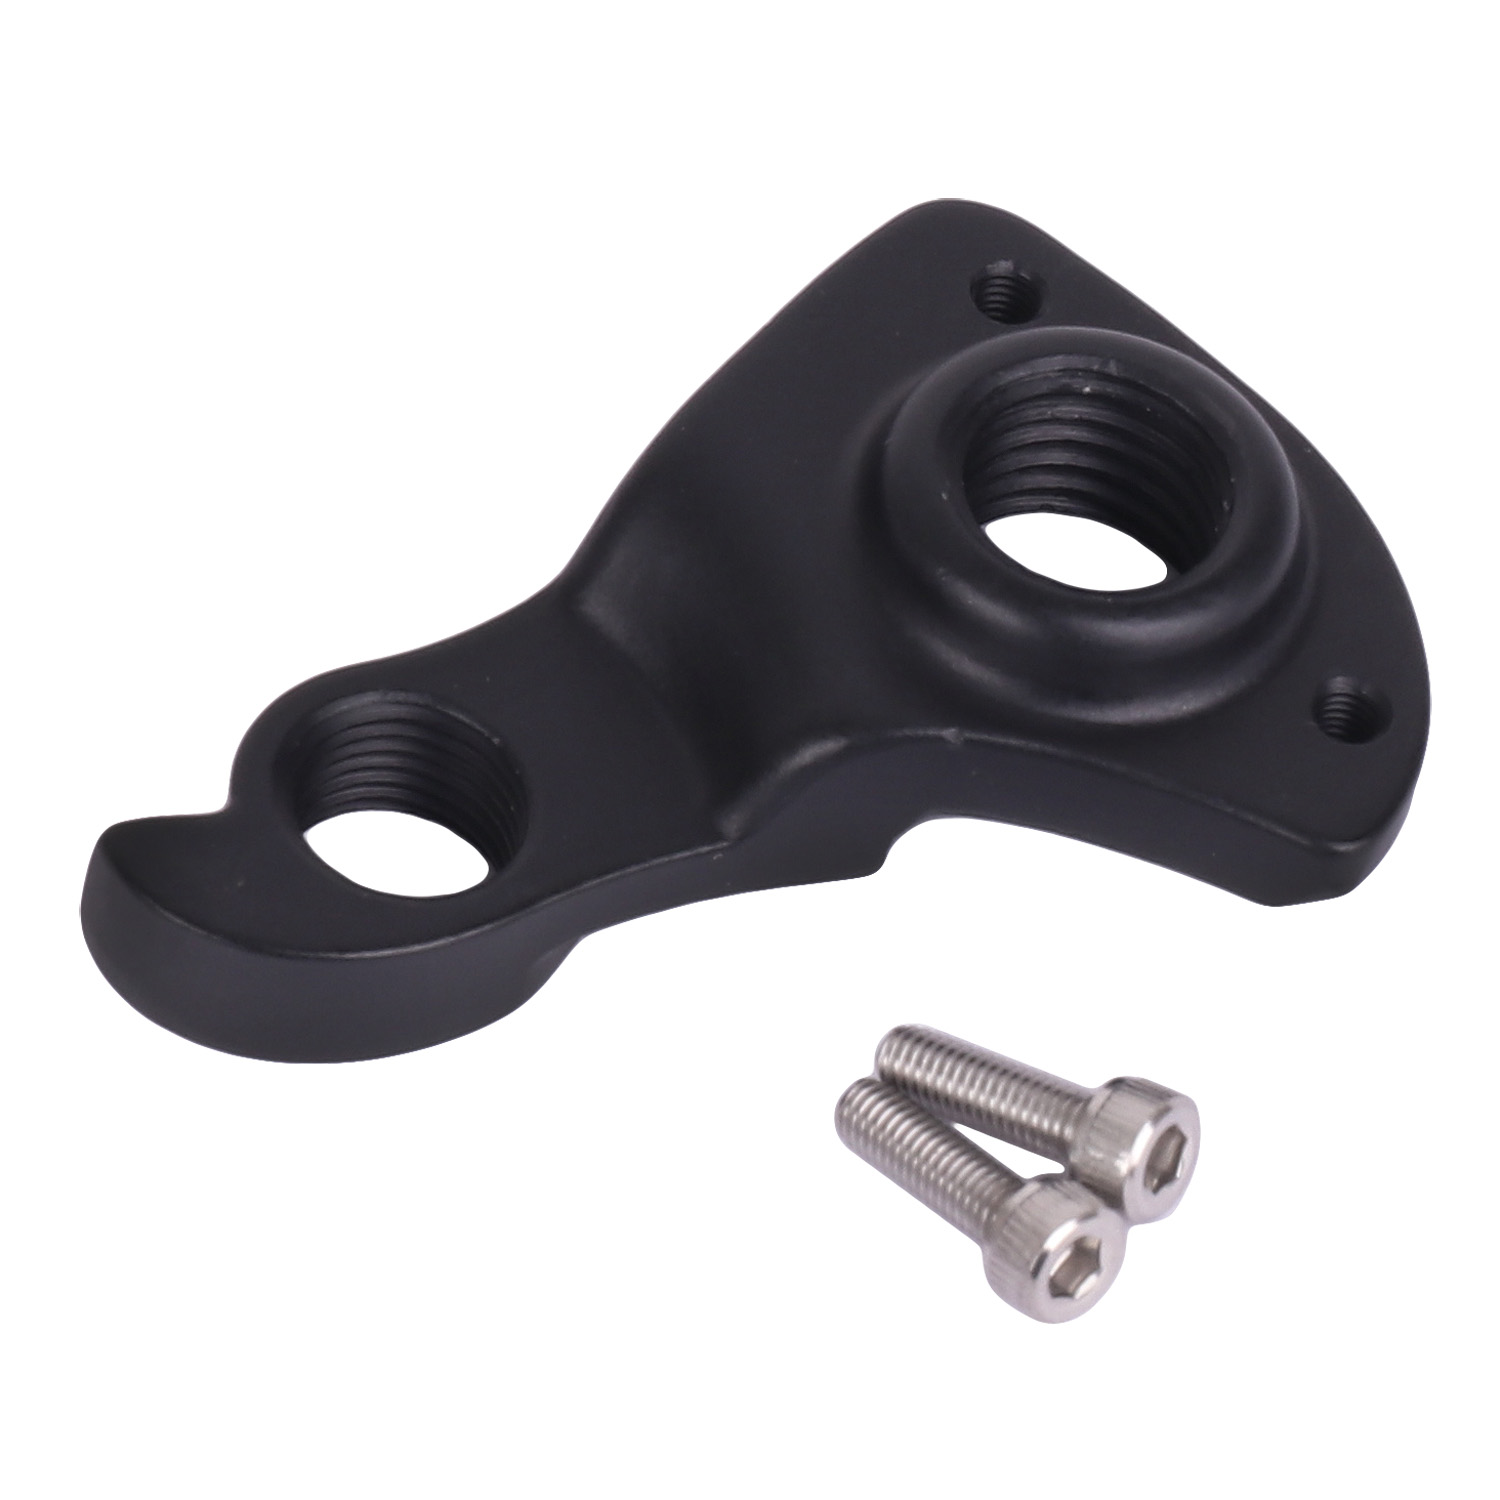 Picture of Giant Derailleur Hanger for Avail / Defy / TCR - RE266 | 1159-RE2660-001